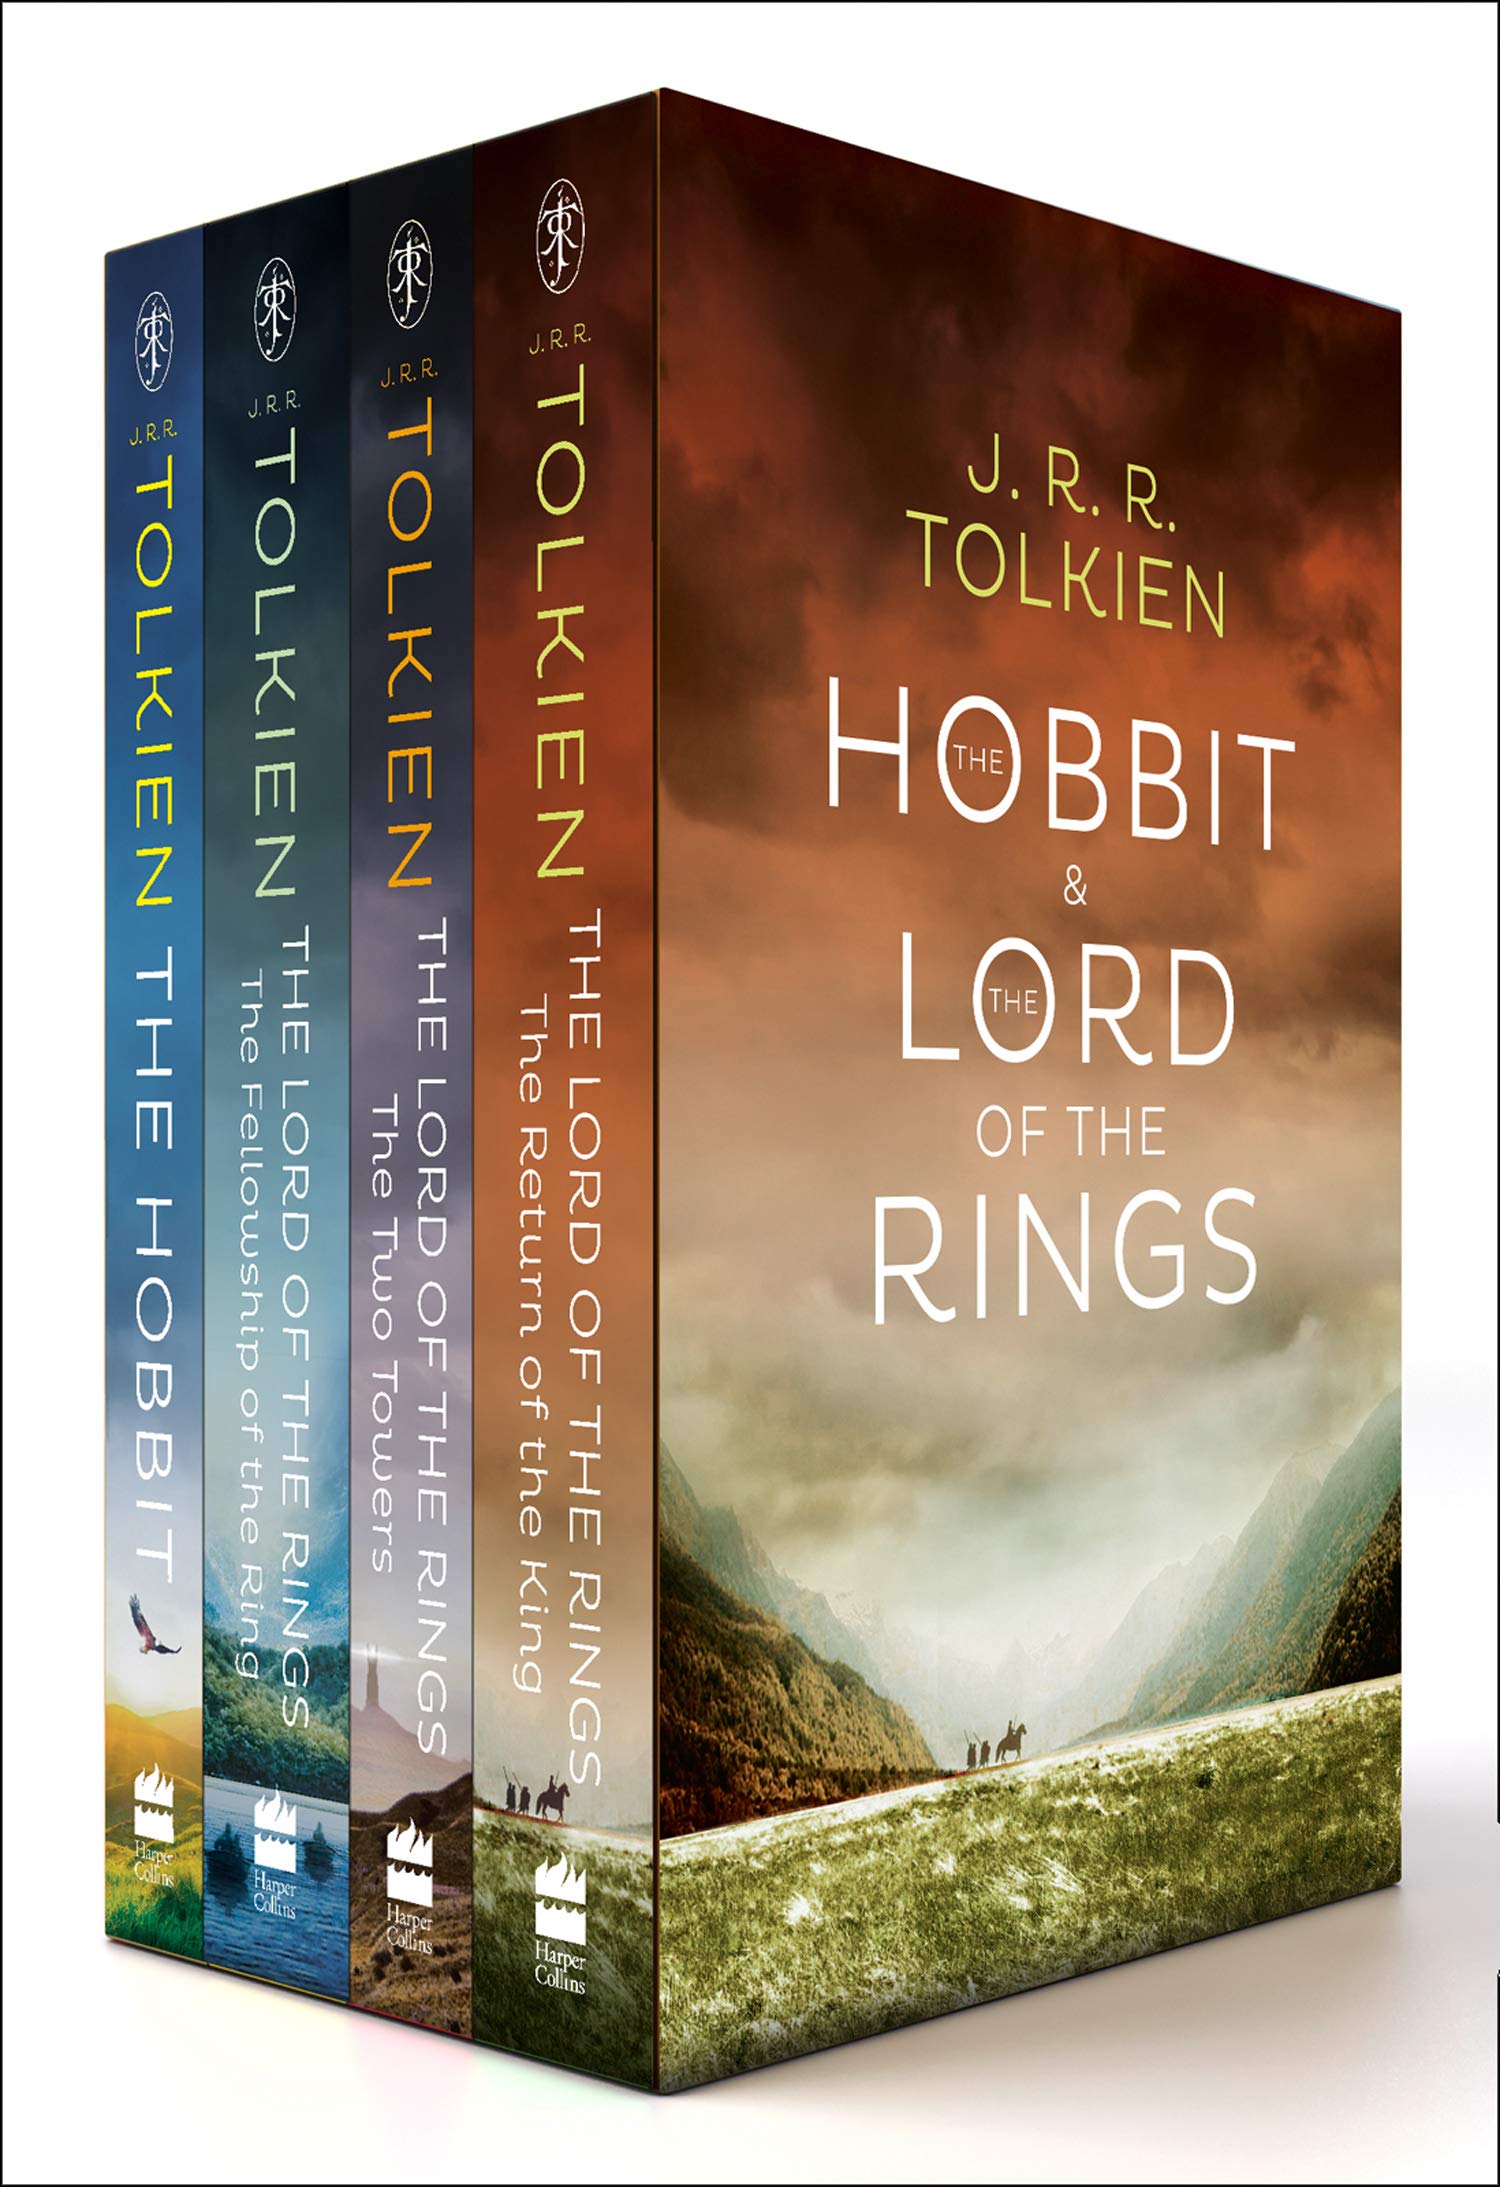 Also Bulk Analytical Hobbit & The Lord of the Rings - J. R. R. Tolkien